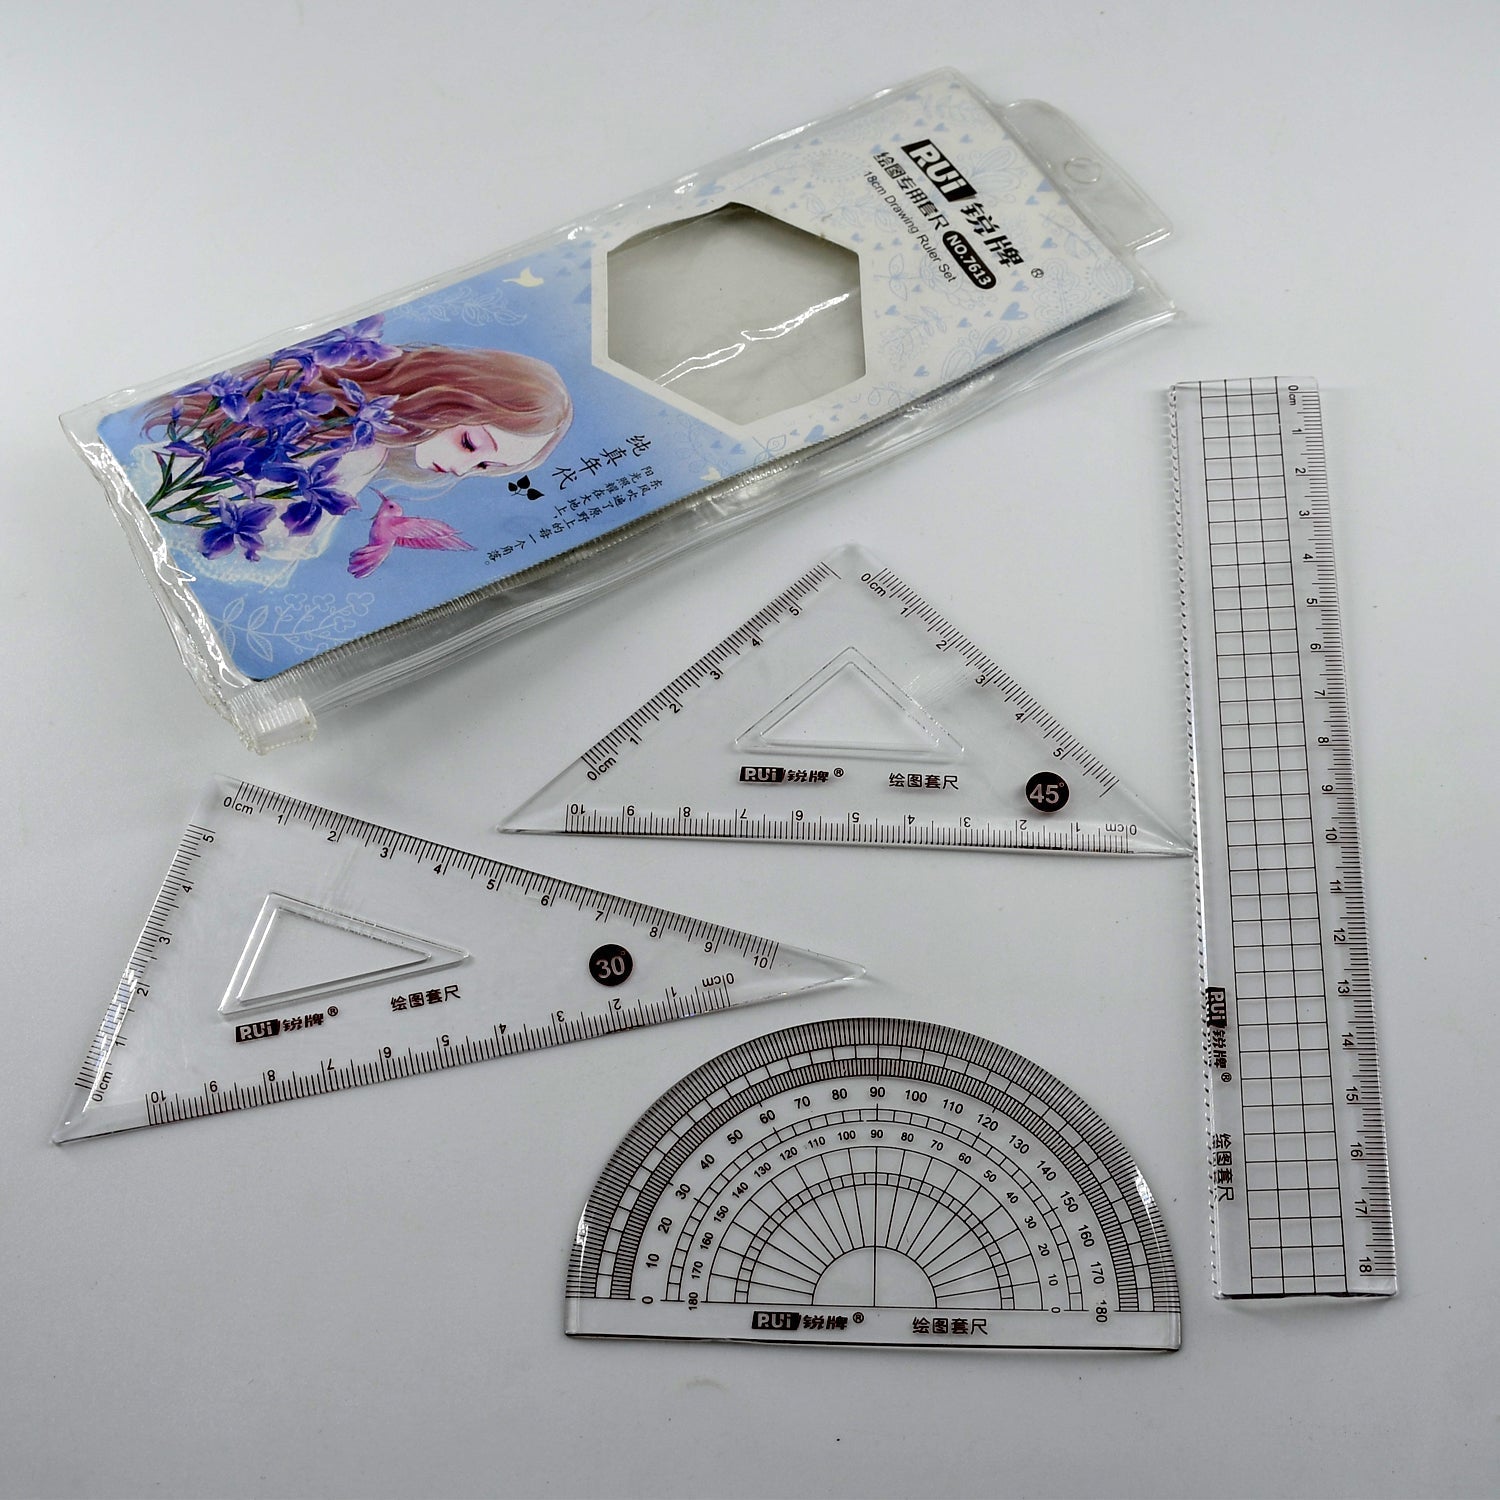 7914 4pcs Ruler Suit Stationery Set for School Student Office ,Draft Rulers for School Office Supplies and Supplies-High School 